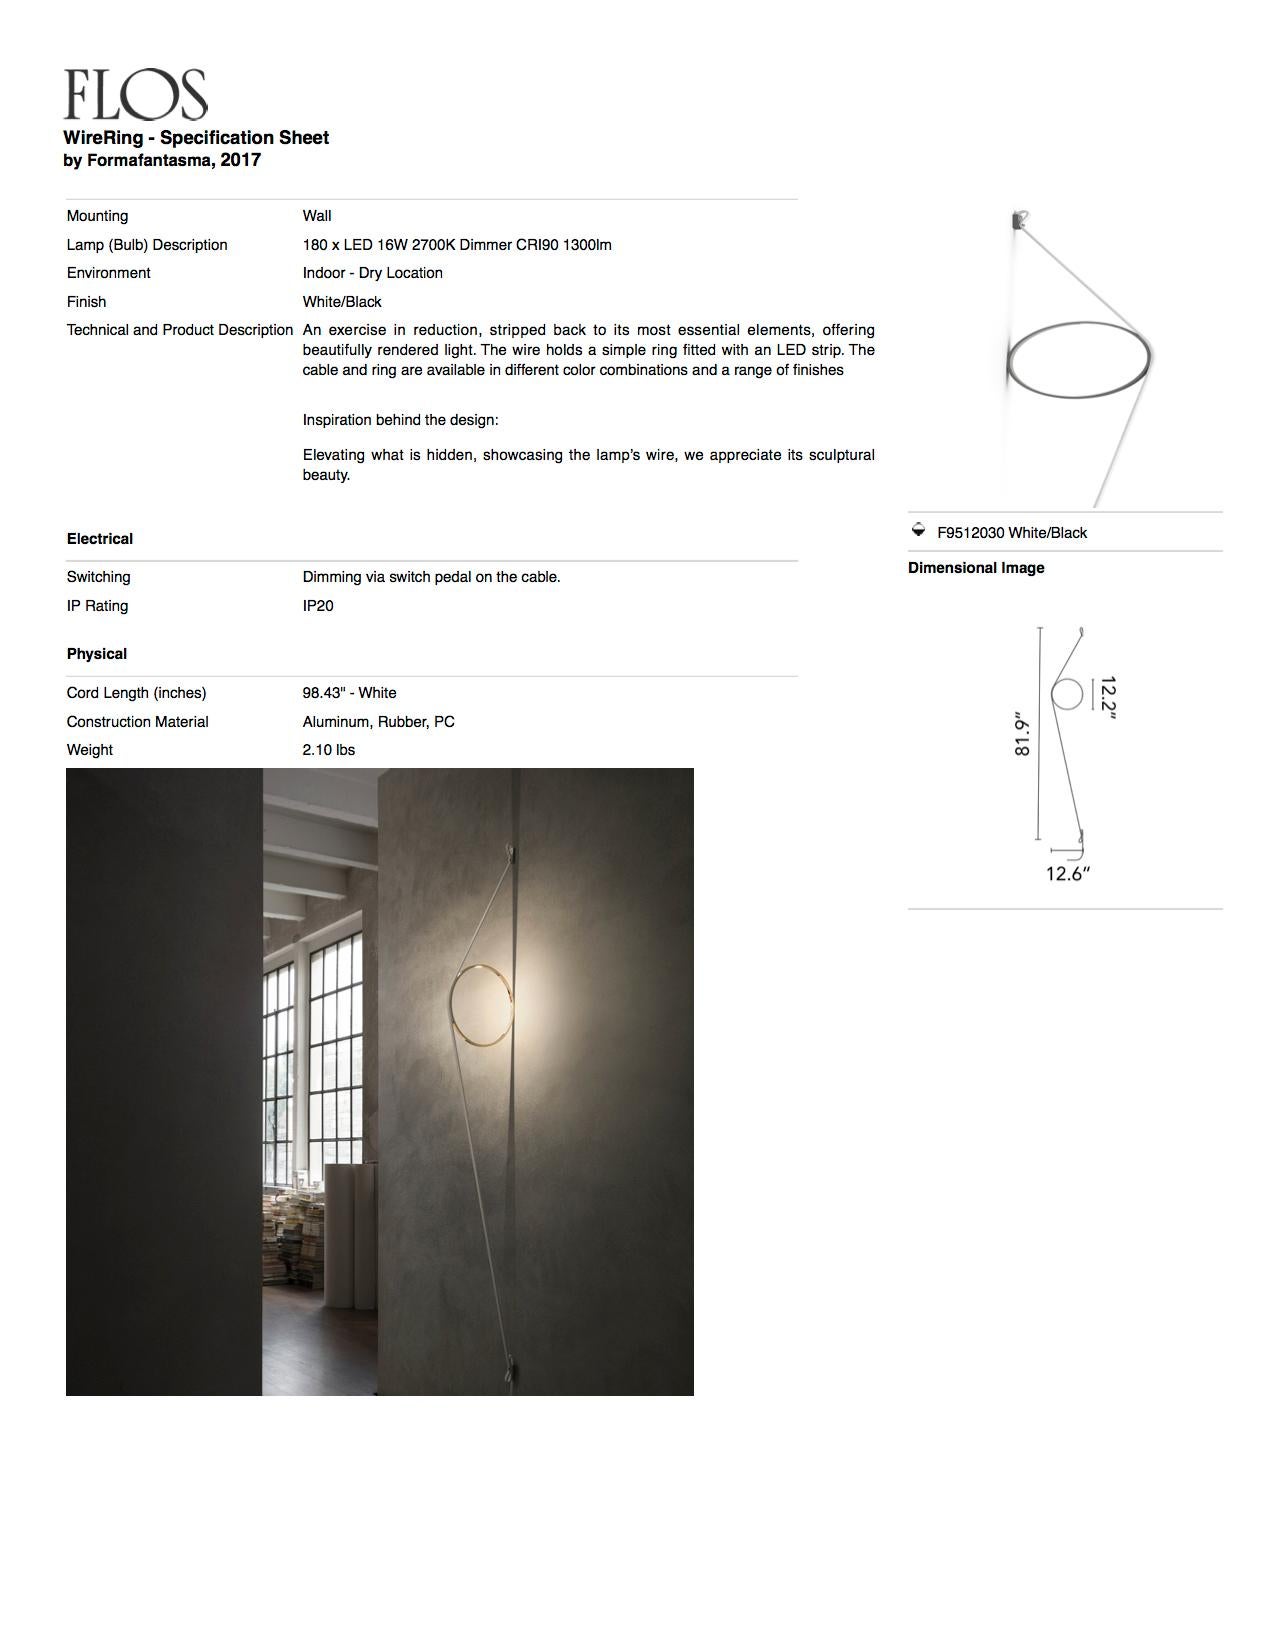 Contemporary FLOS Wirering Wall Light in White and Gold by Formafantasma